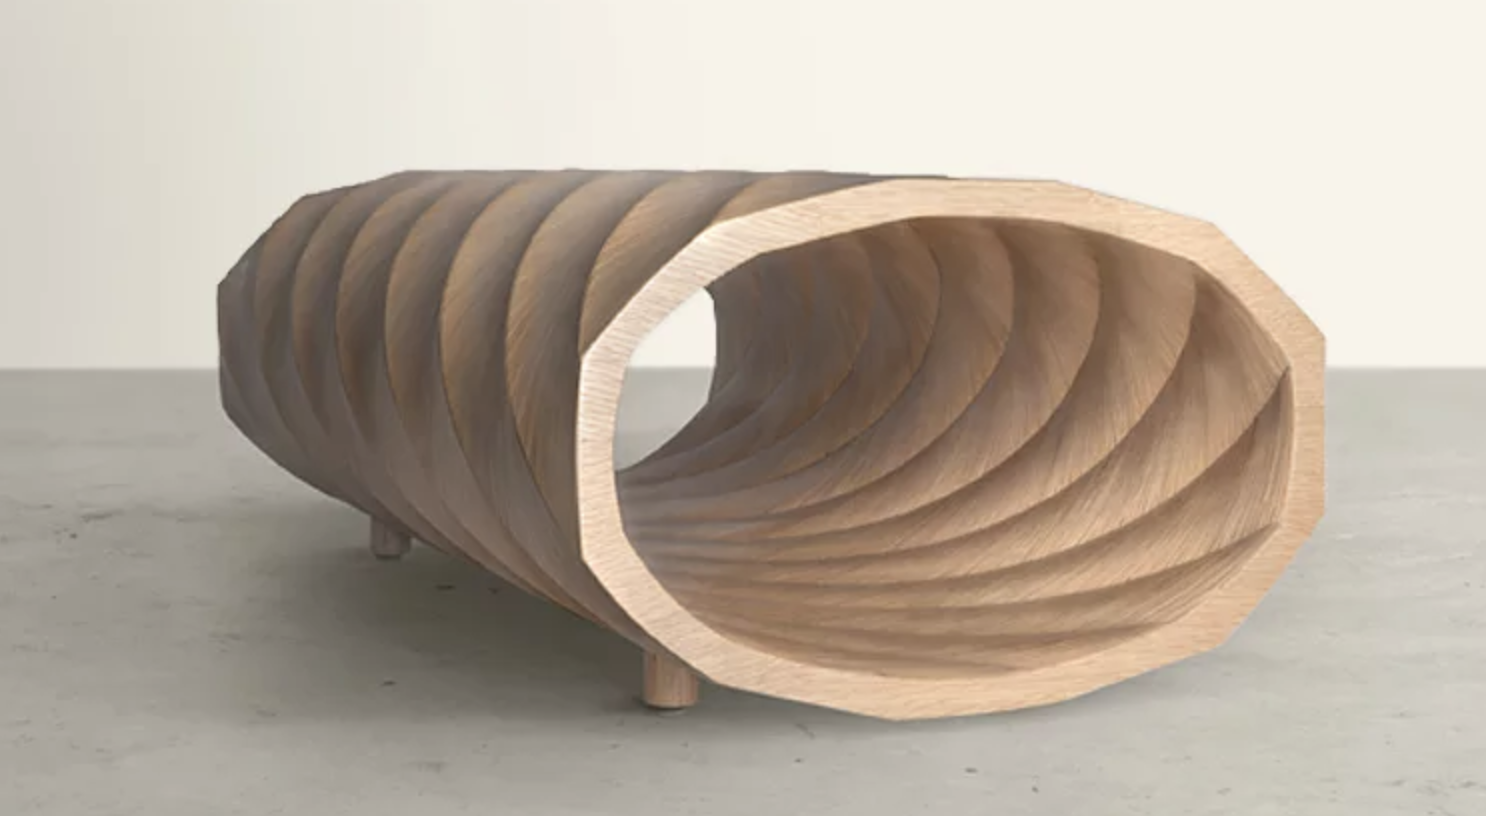 Twisted Table by Tesler + Mendelovitch